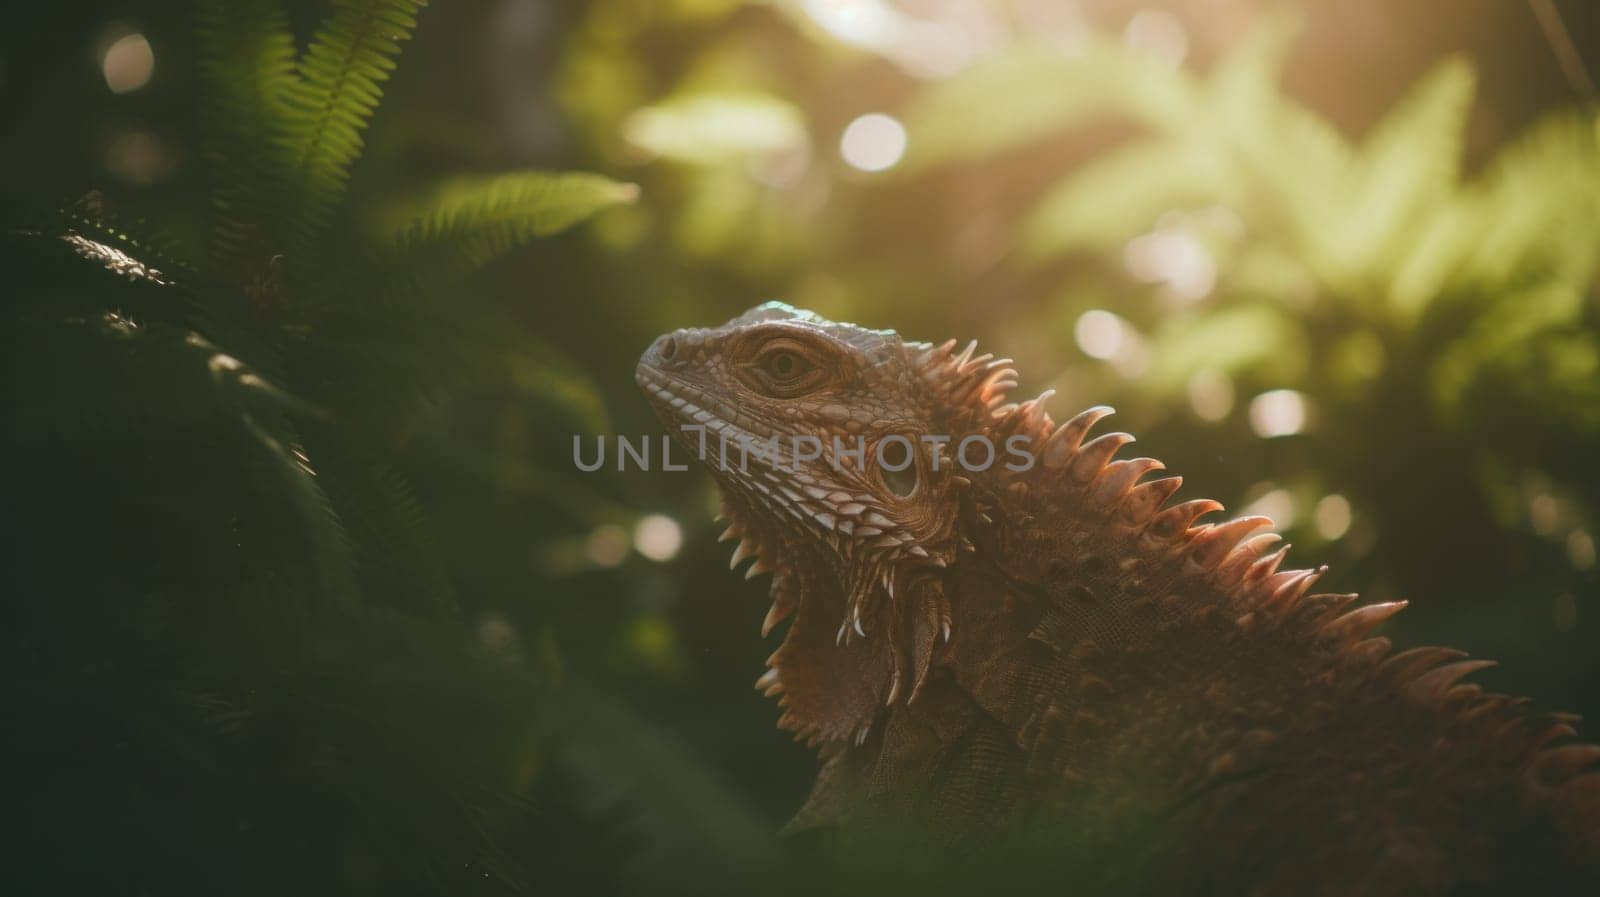 A close up of a lizard in a forest